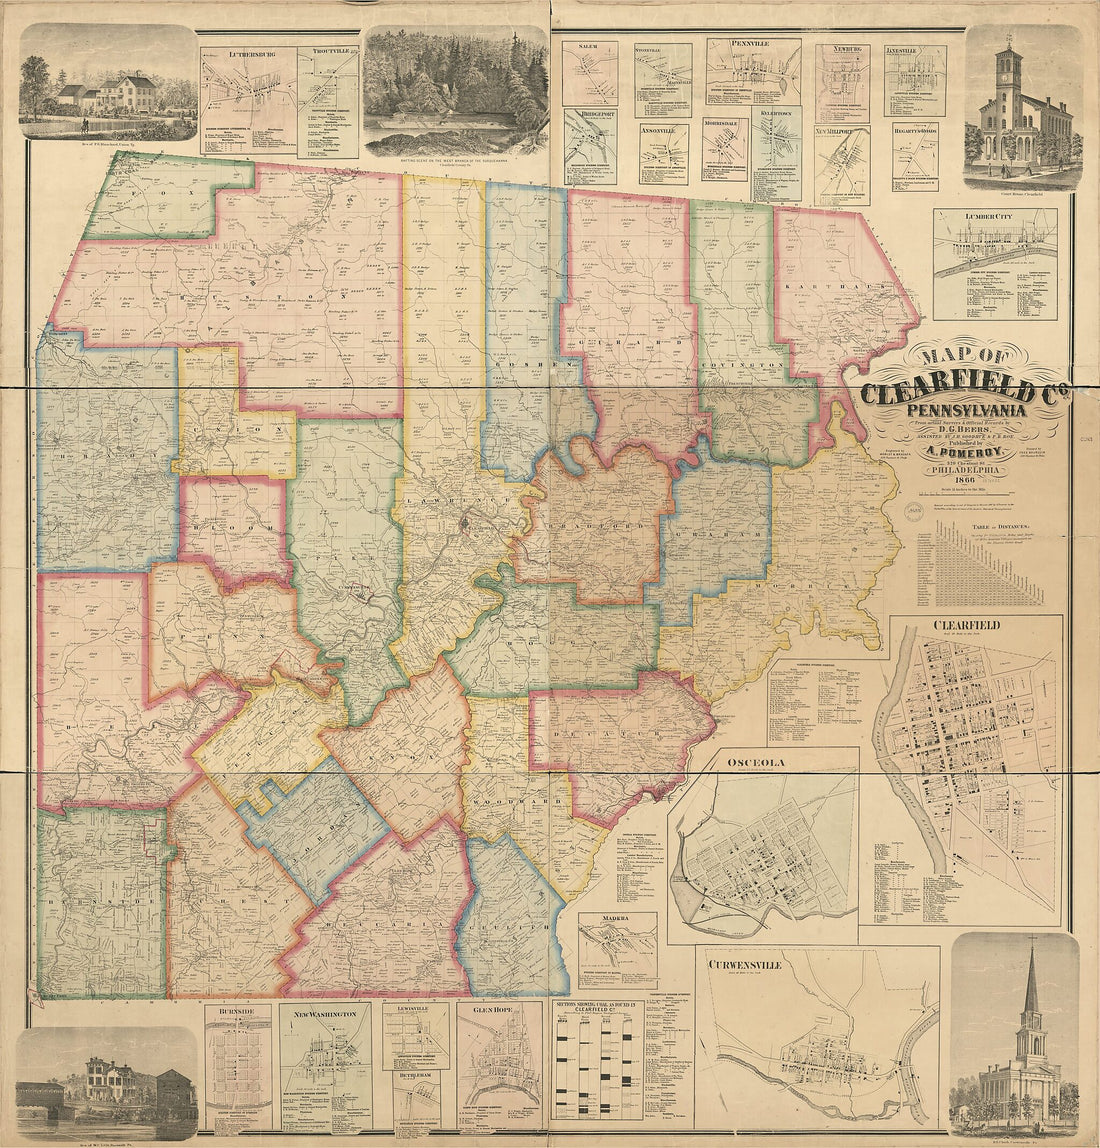 This old map of Map of Clearfield County, Pennsylvania : from Actual Surveys &amp; Official Records from 1866 was created by D. G. (Daniel G.) Beers, F. (Frederick) Bourquin, J. H. Goodhue, A. Pomeroy, Frederick B. Roe,  Worley &amp; Bracher in 1866